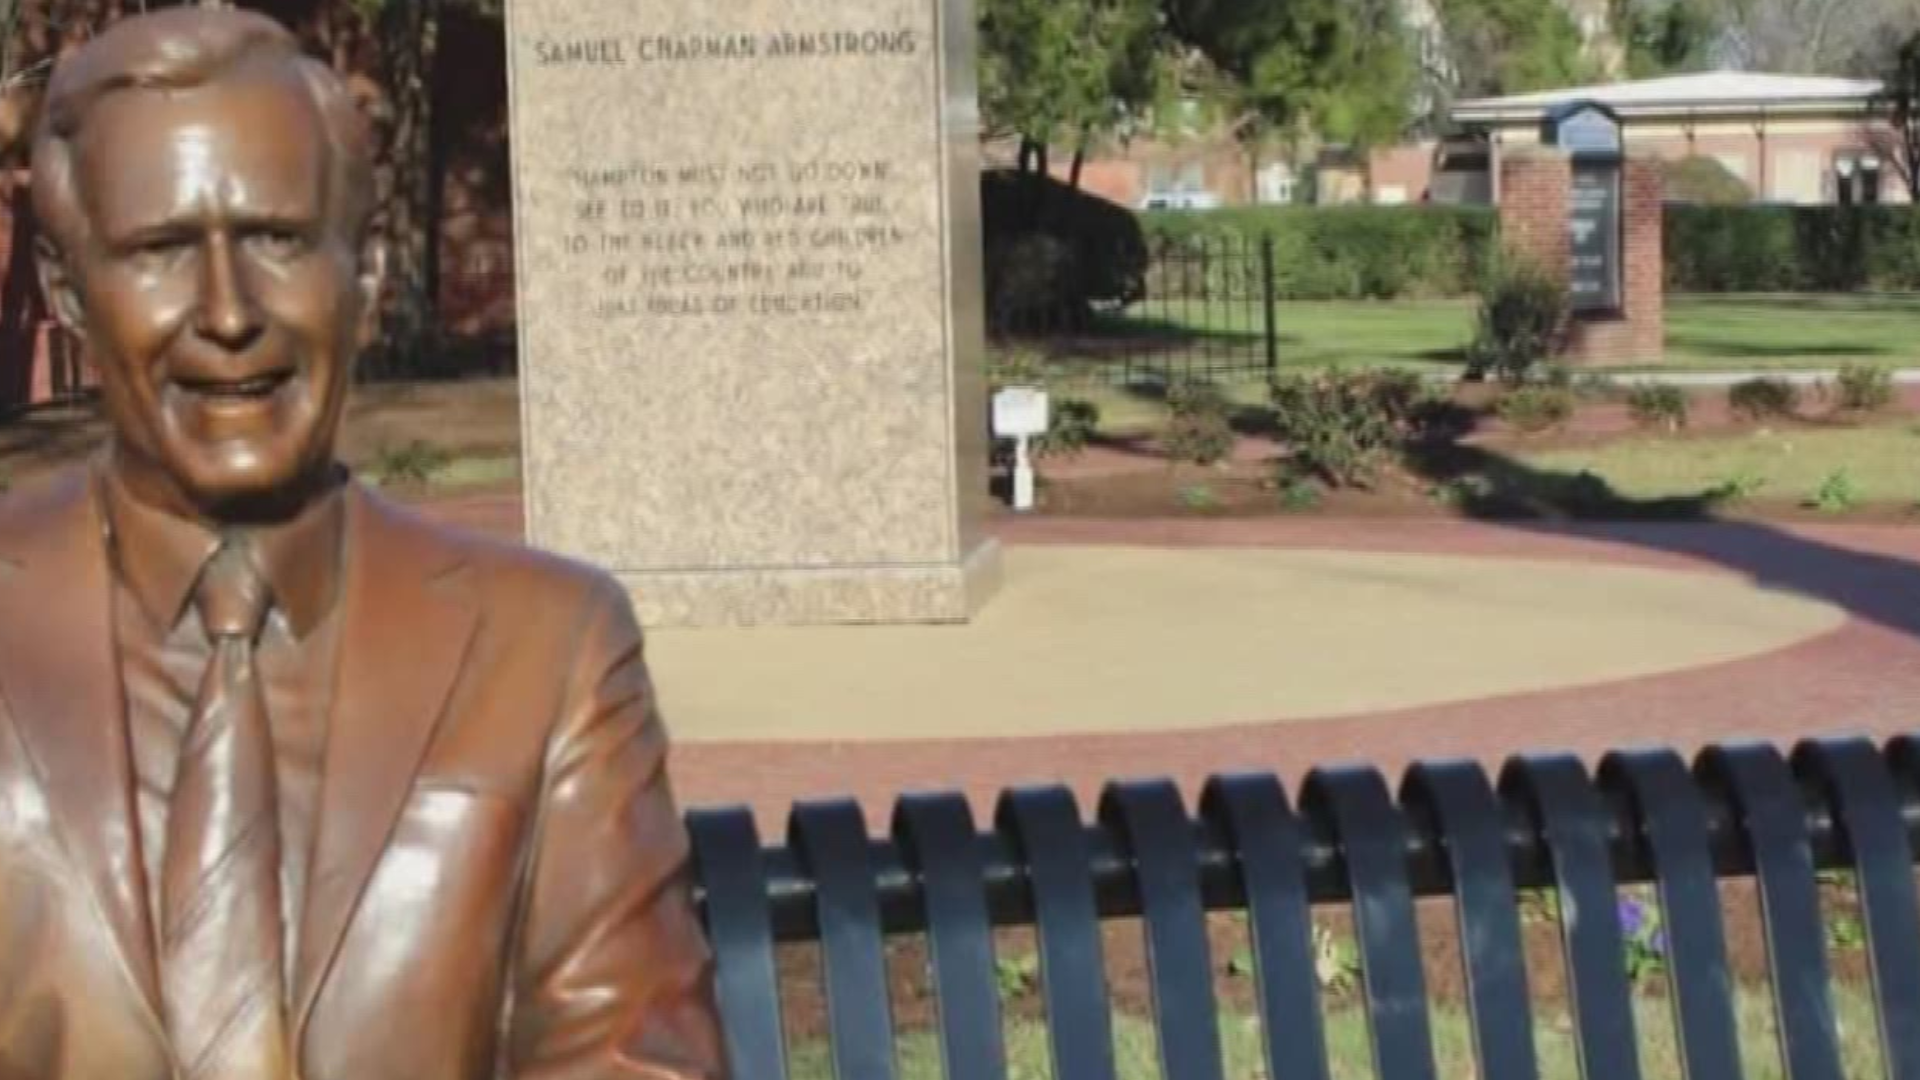 Hampton University unveiled legacy park which features statues of people who had an impact of the college, but some of the statues are causing controversy.